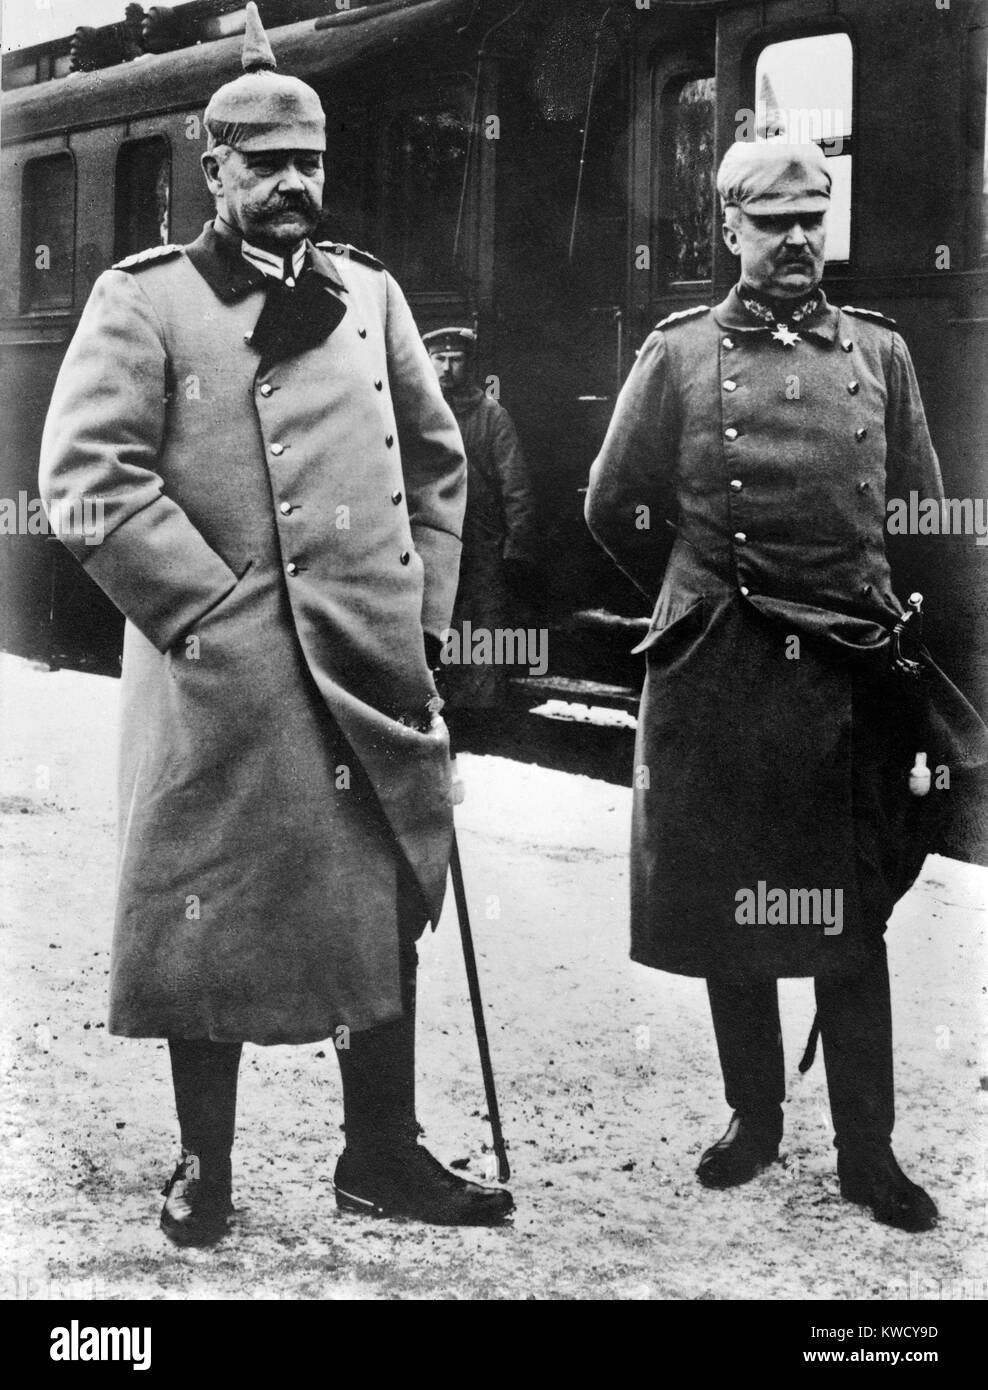 German political and military leaders during World War 1. L-R: General Paul von Hindenburg, and Gen. Erich Ludendorff, c. 1915-18. Together they were the defacto dictators of Germany from 1916-1918, during World War 1 (BSLOC 2017 1 7) Stock Photo